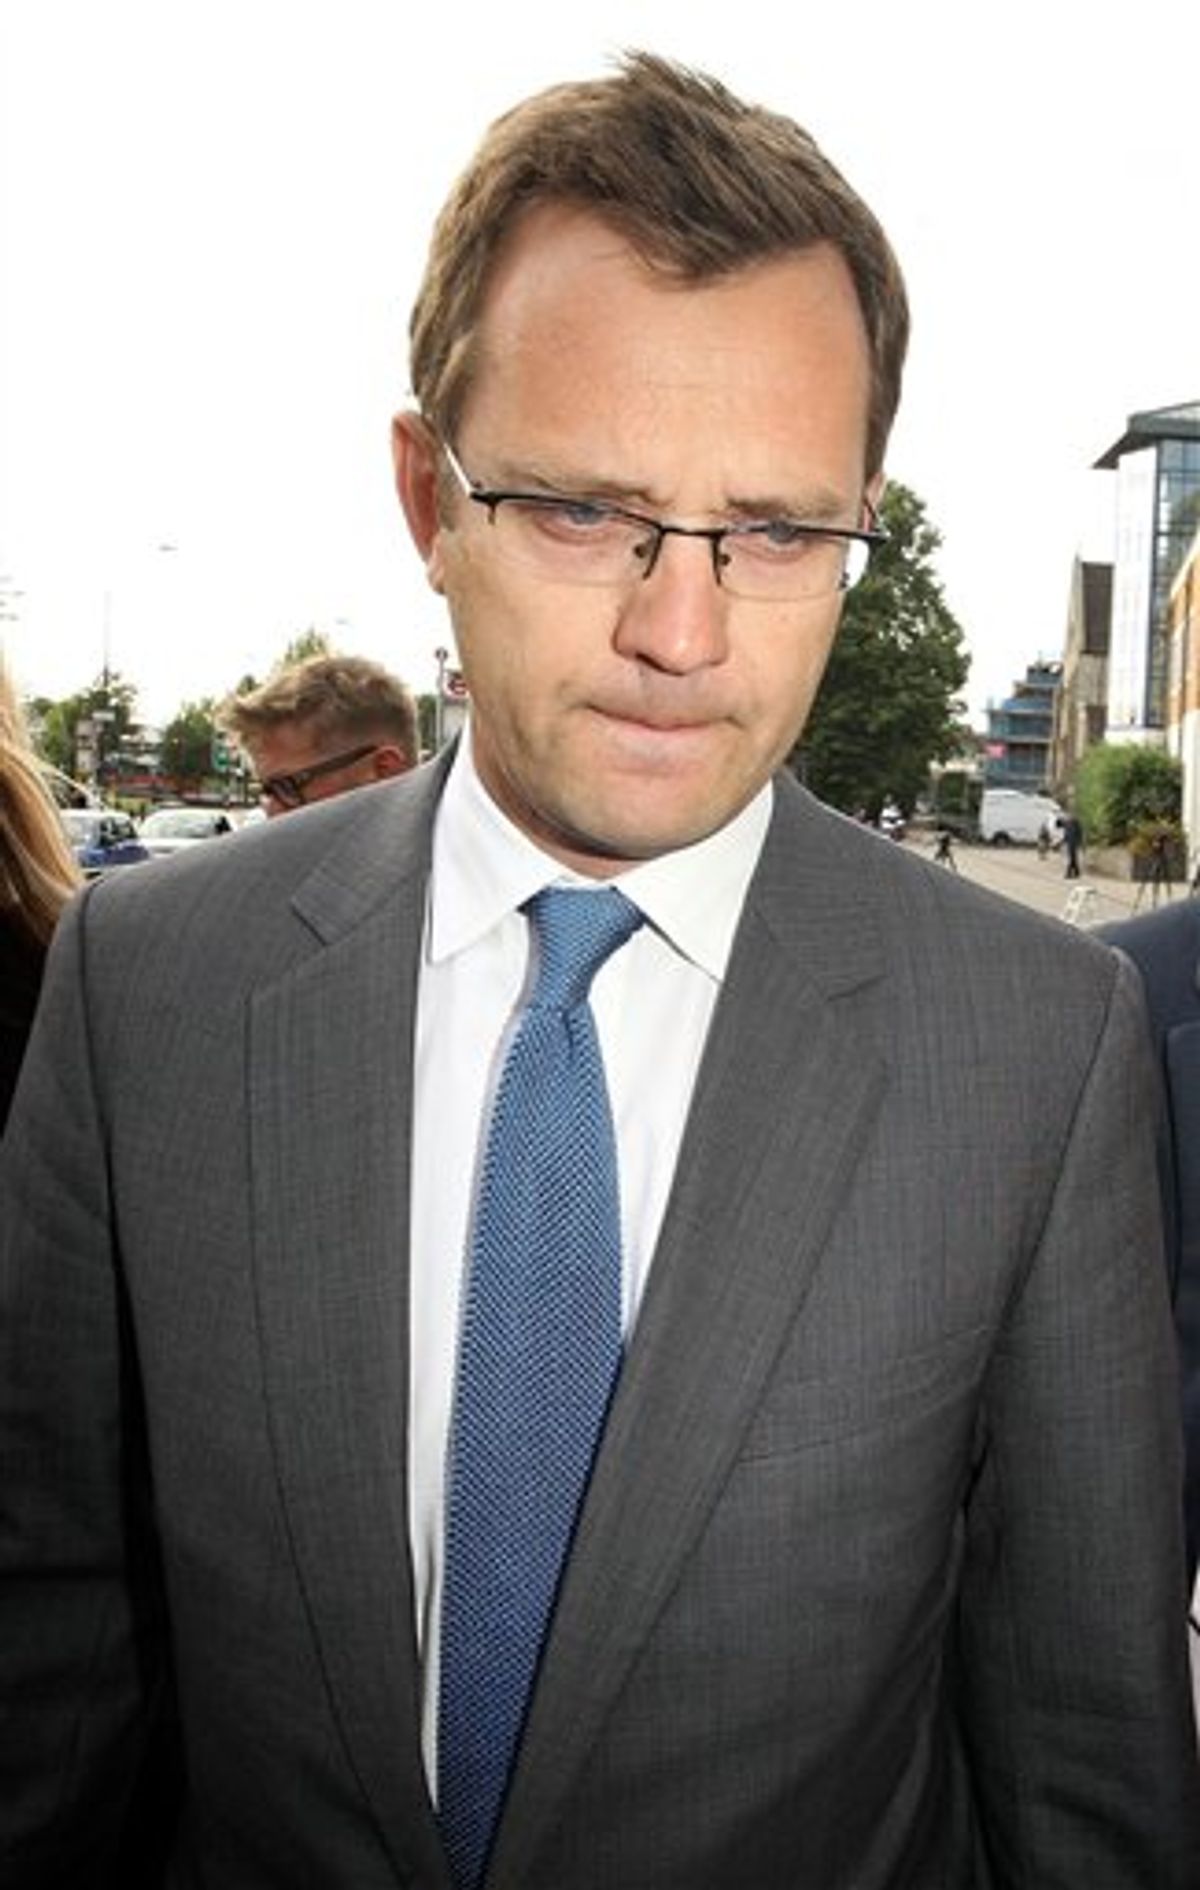 July 8 2011 photo  of former Downing Street communications chief and  previously News of the World tabloid editor Andy Coulson who avoided the top-level security checks by Government investigators that his predecessors endured, it has been claimed Thursday July 21, 2011. Britain's Prime Minister David Cameron admitted Wednesday that his former media strategist, now arrested under suspicion of phone hacking while at the paper, had only a basic level of vetting, which meant he was not cleared to view the most secret Government files unlike his predecessors under former Prime Ministers.  Opposition lawmakers ask if he was vetted at a less stringent level to avoid information about his past coming to light. (AP Photo/ Dominic Lipinski / PA ) UNITED KINGDOM OUT - NO SALES - NO ARCHIVES (AP)